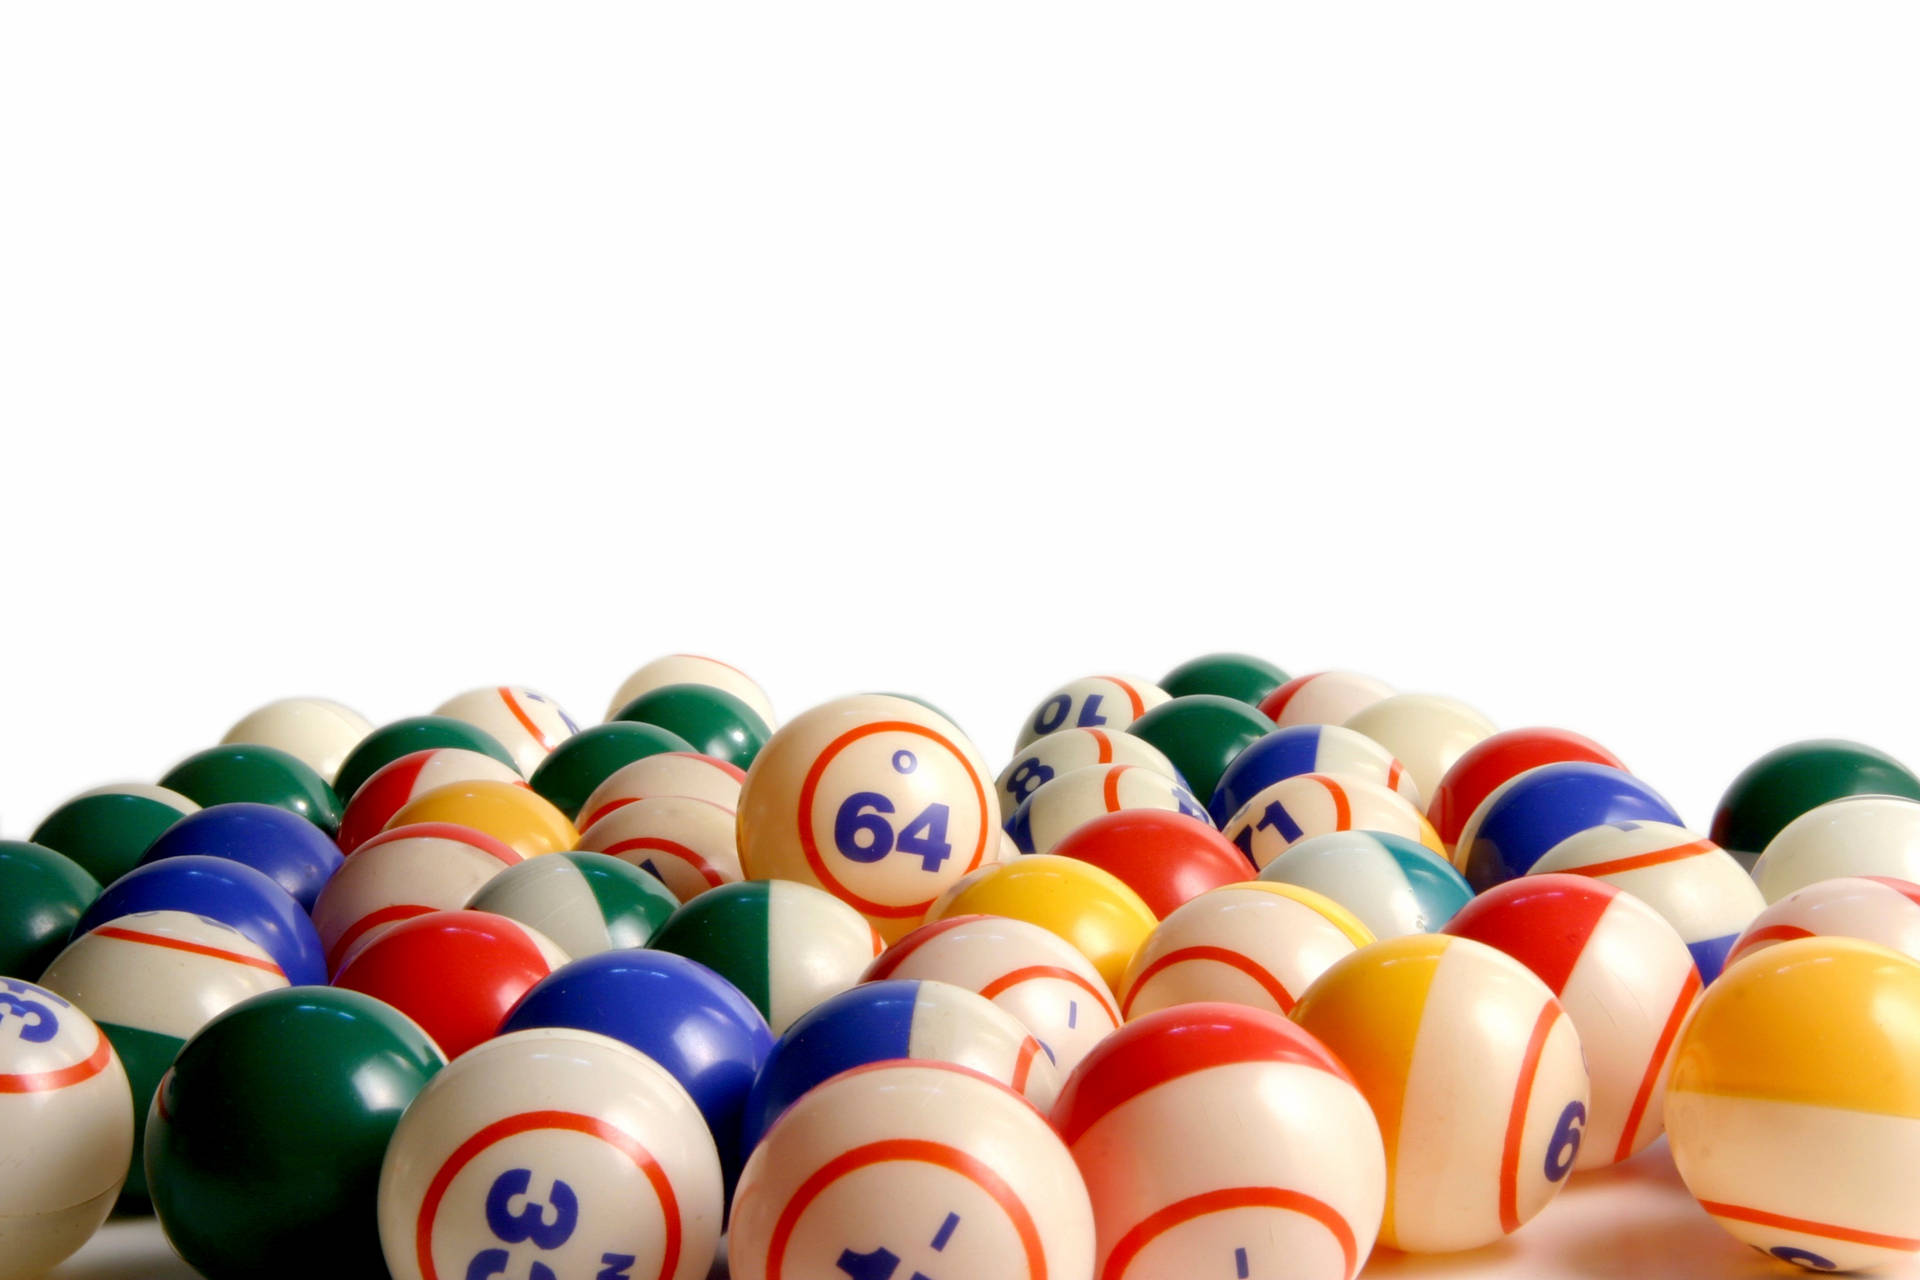 An engaging game of chance - bingo balls collection Wallpaper